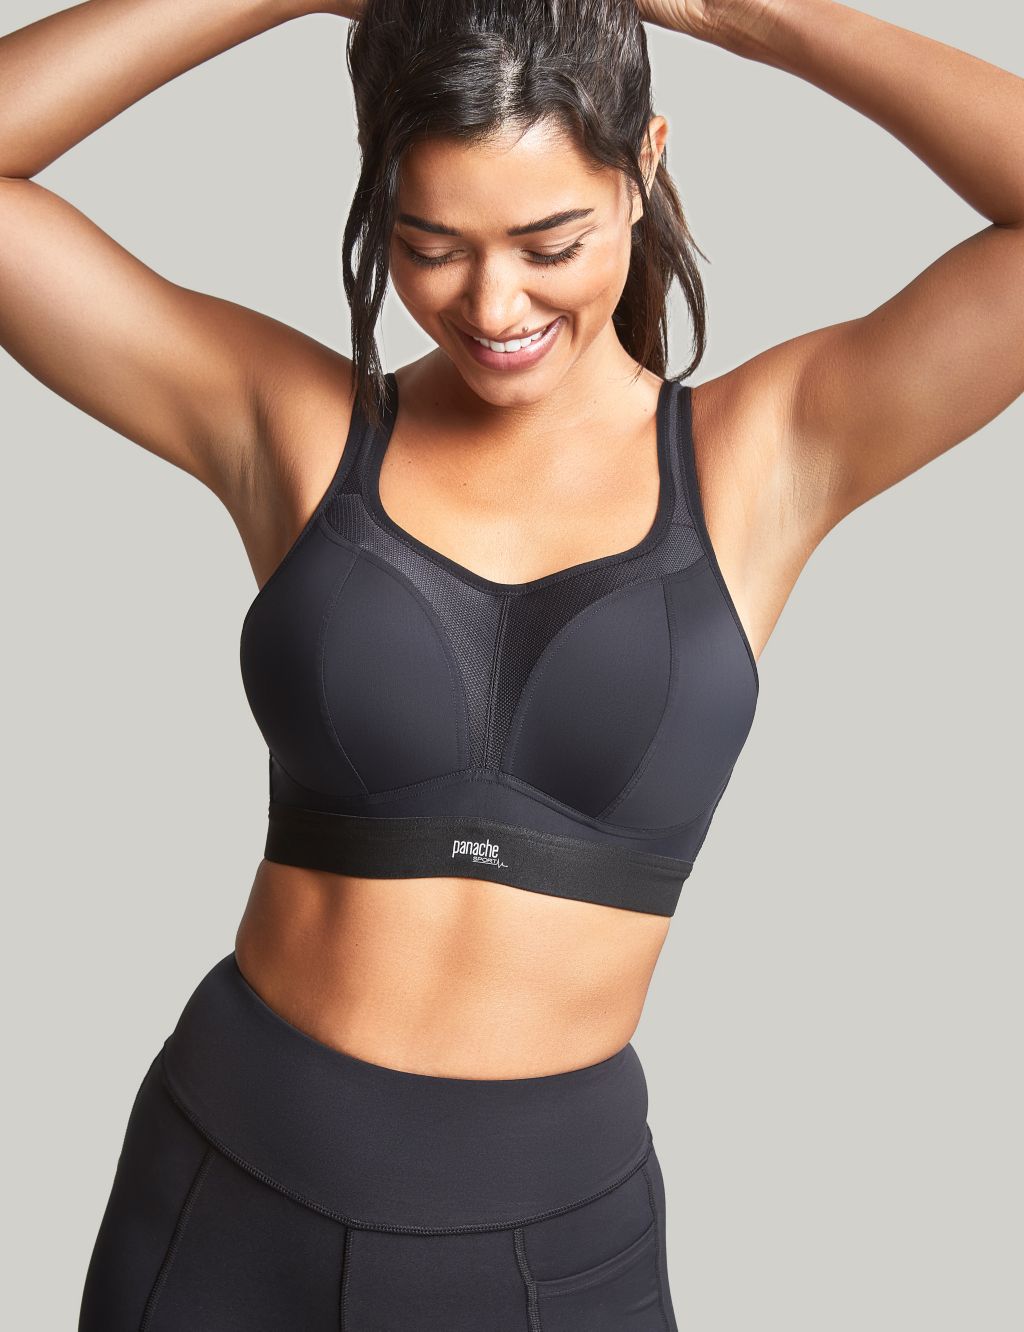 M&S eyes stronger presence in sports clothing with new activewear range